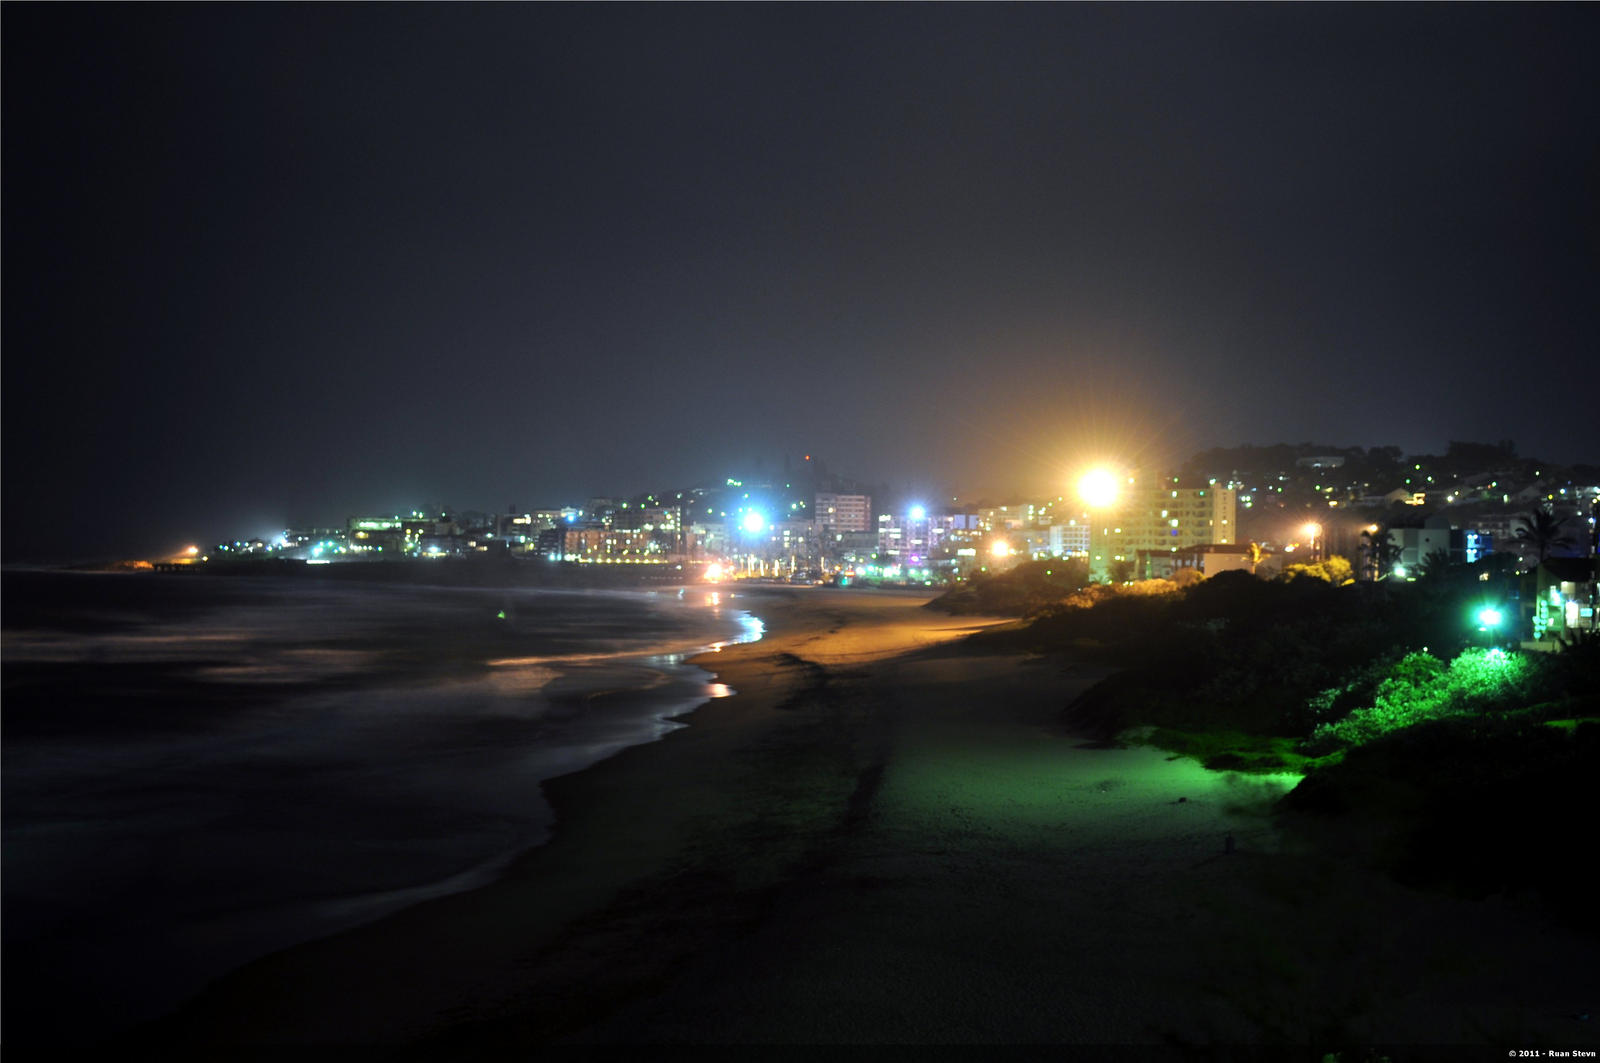 margate_beach_at_night_by_steynfx-d3752c